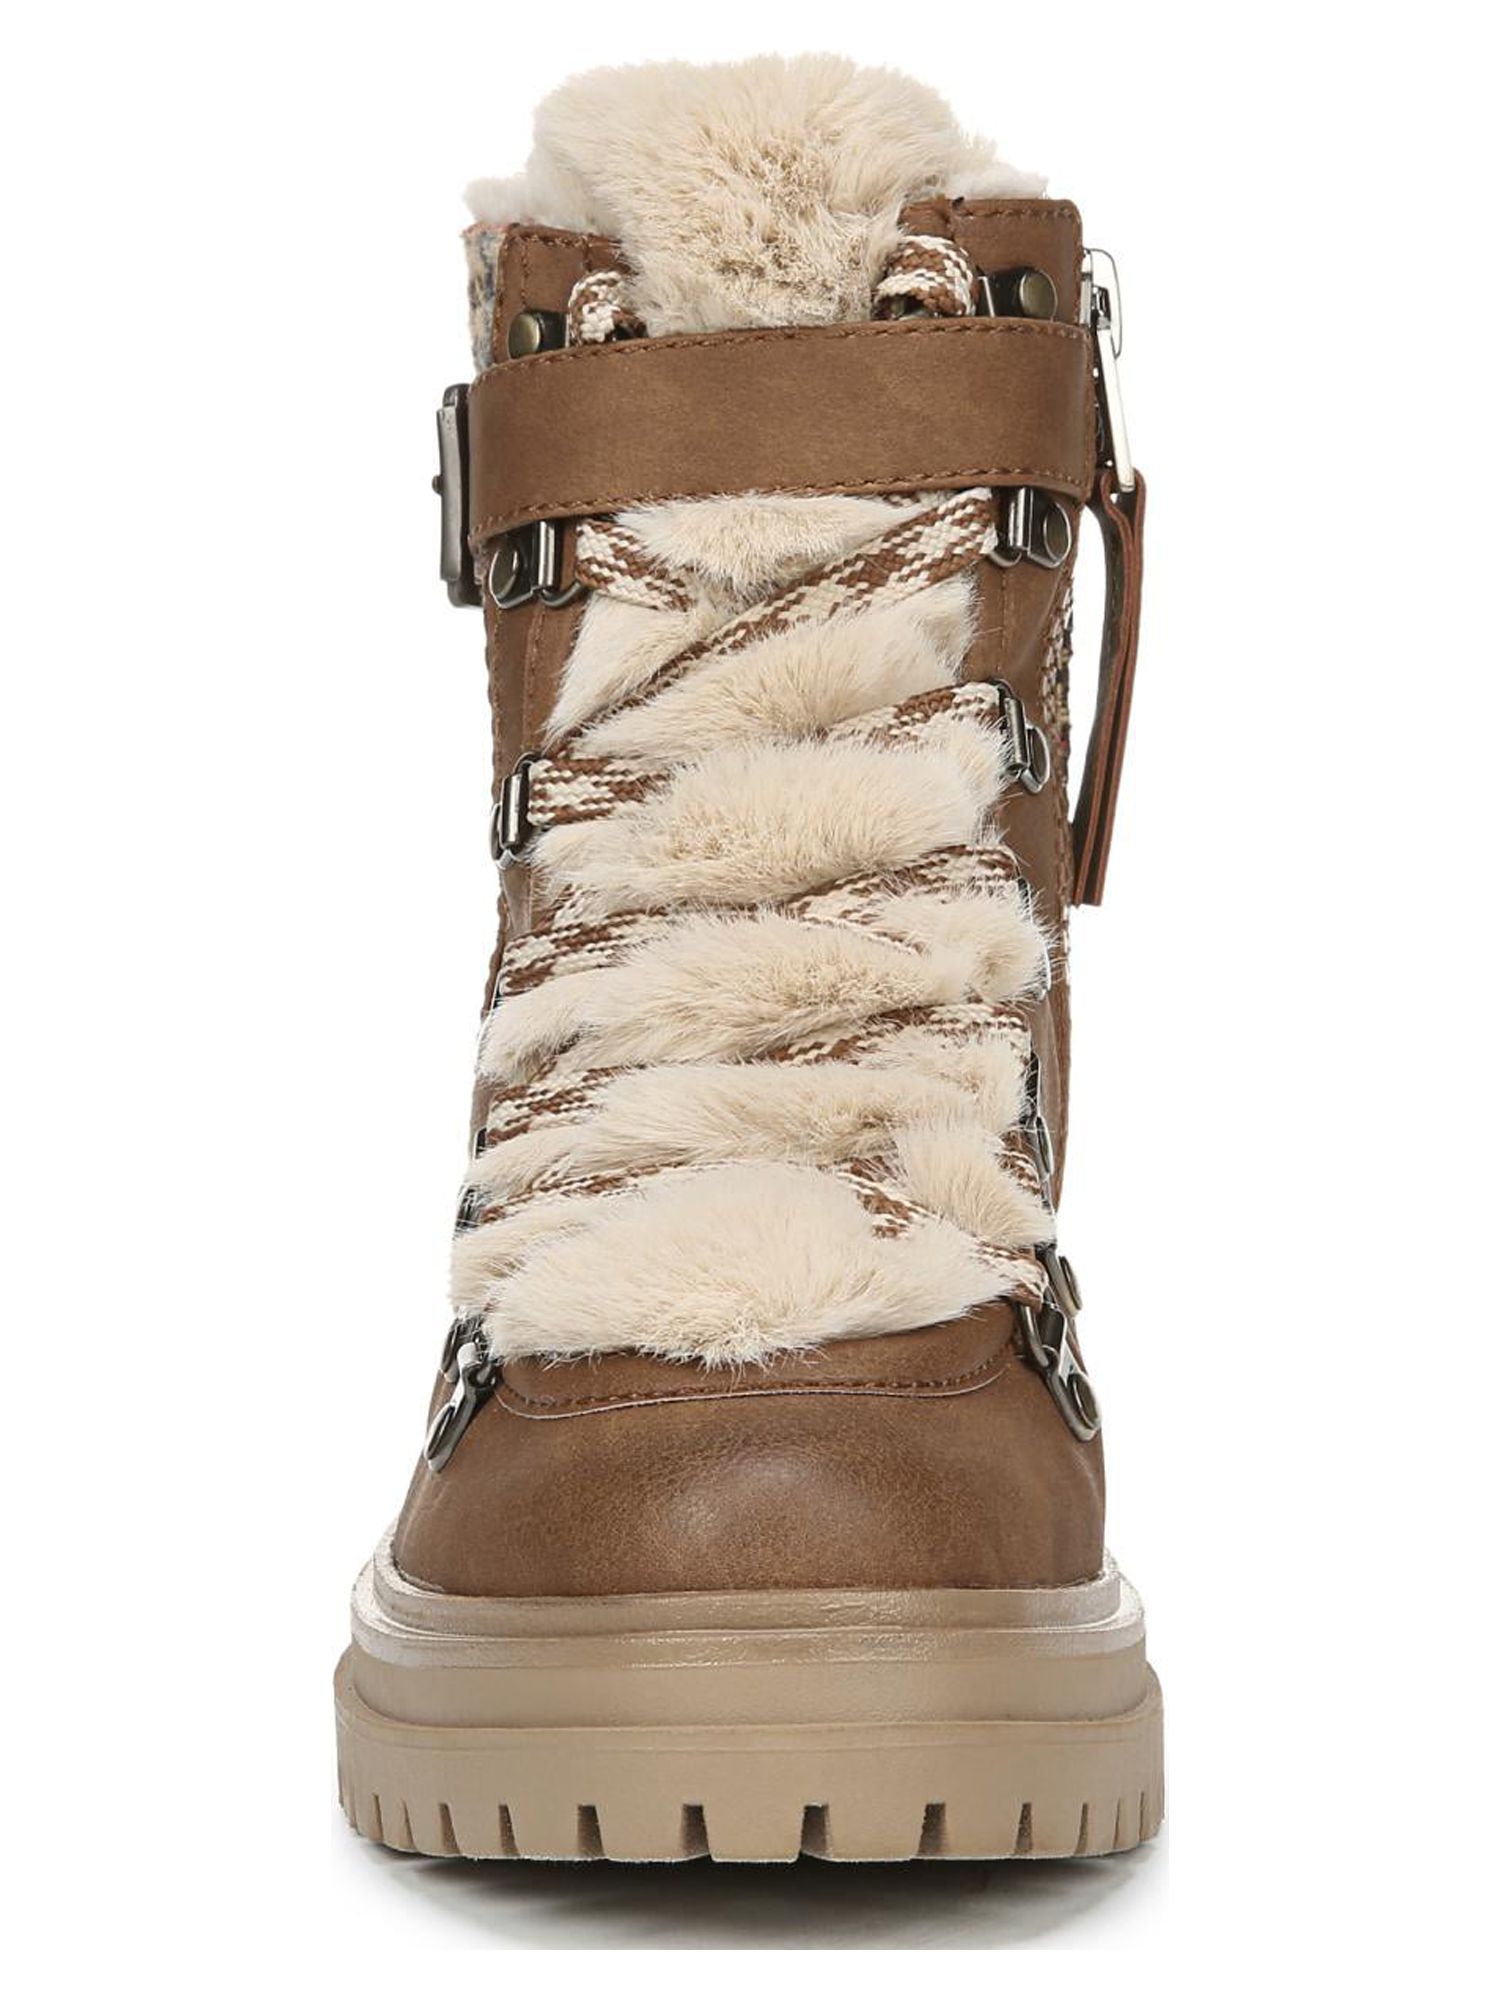 Circus by Sam Edelman Women's Gretchen Shearling Hiker Boot - image 5 of 8